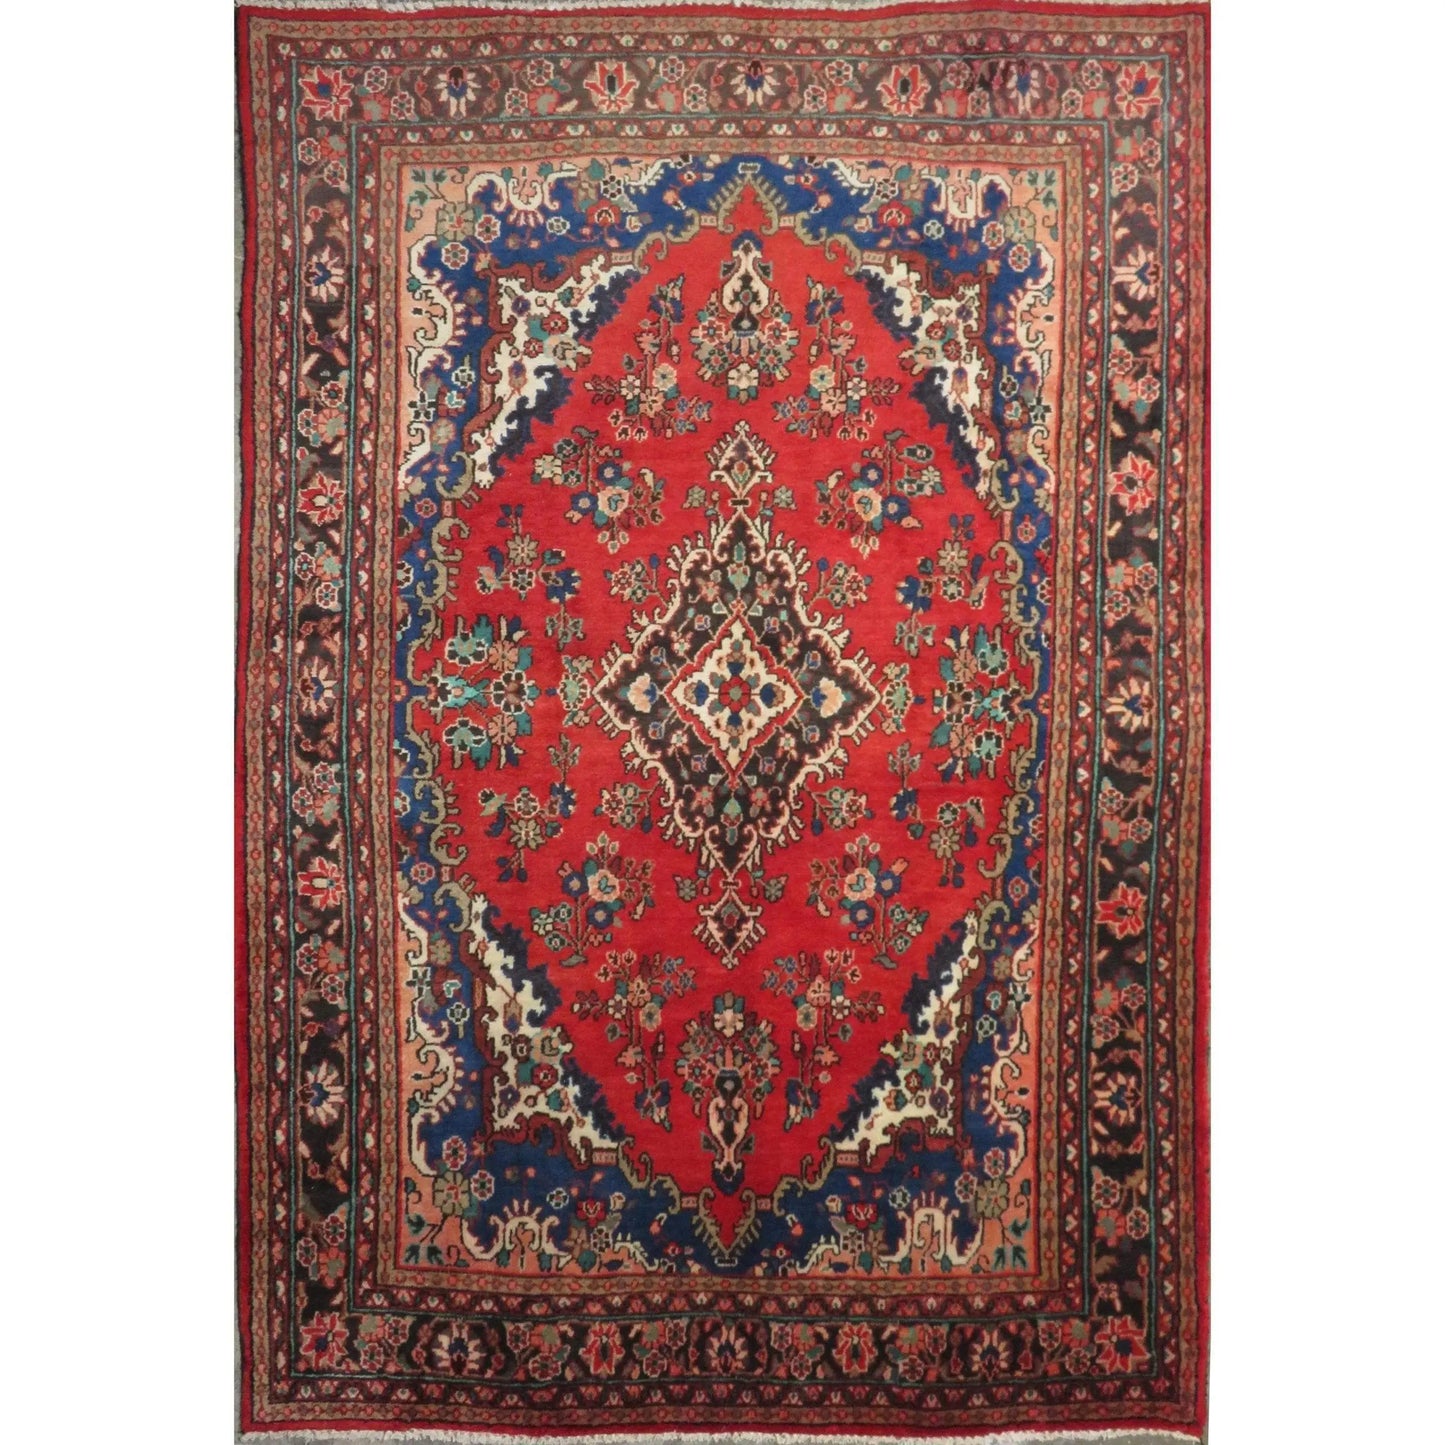 Hand-Knotted Persian Wool Rug _ Luxurious Vintage Design, 10'4" x 6'9", Artisan Crafted